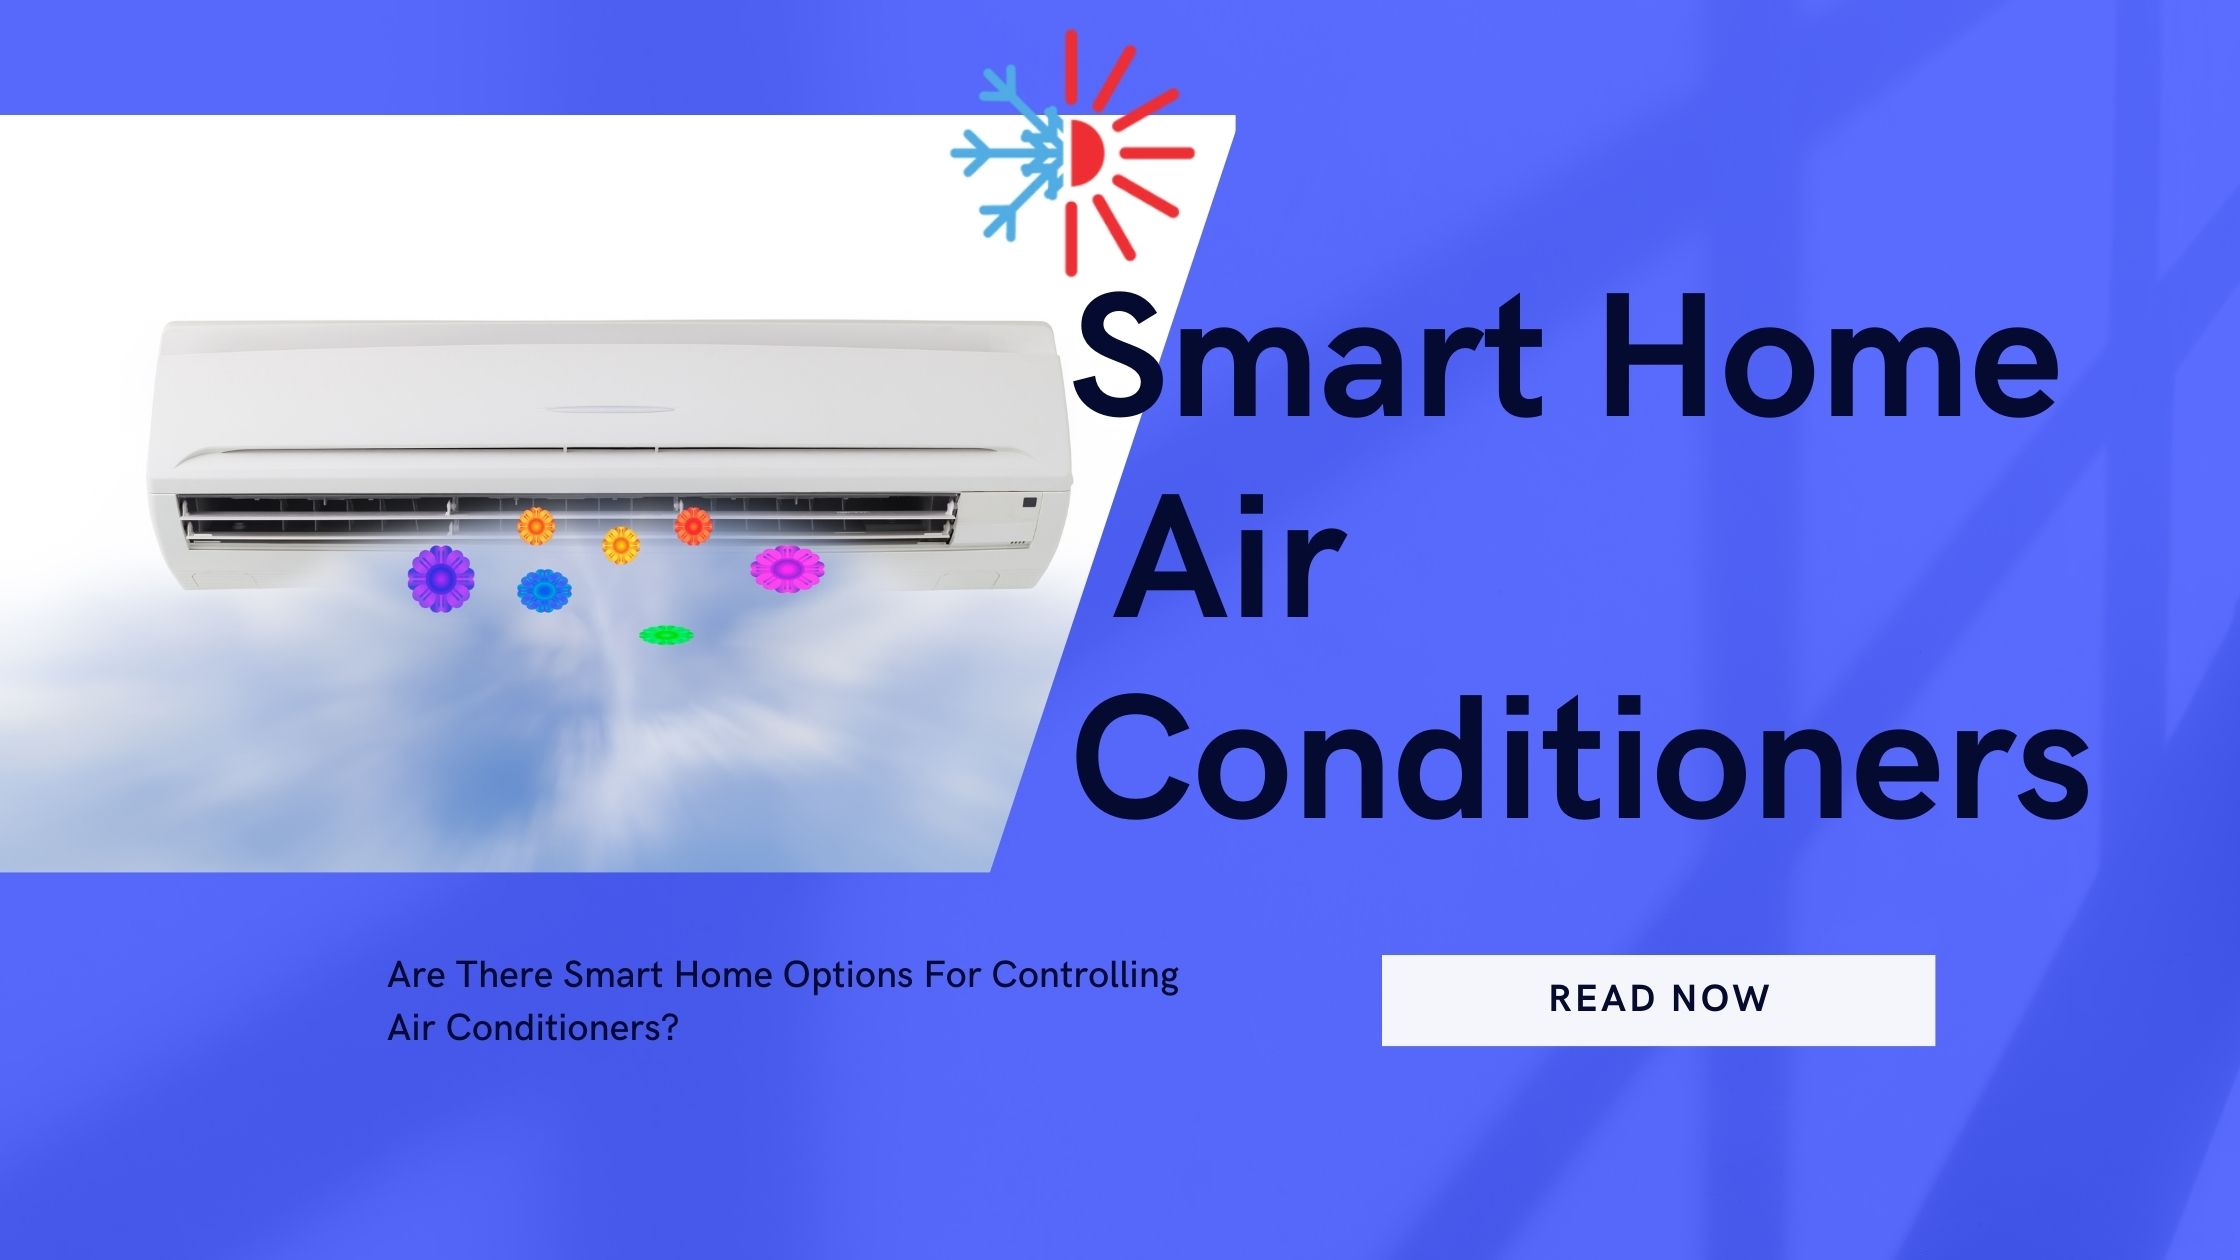 Are There Smart Home Options For Controlling Air Conditioners?